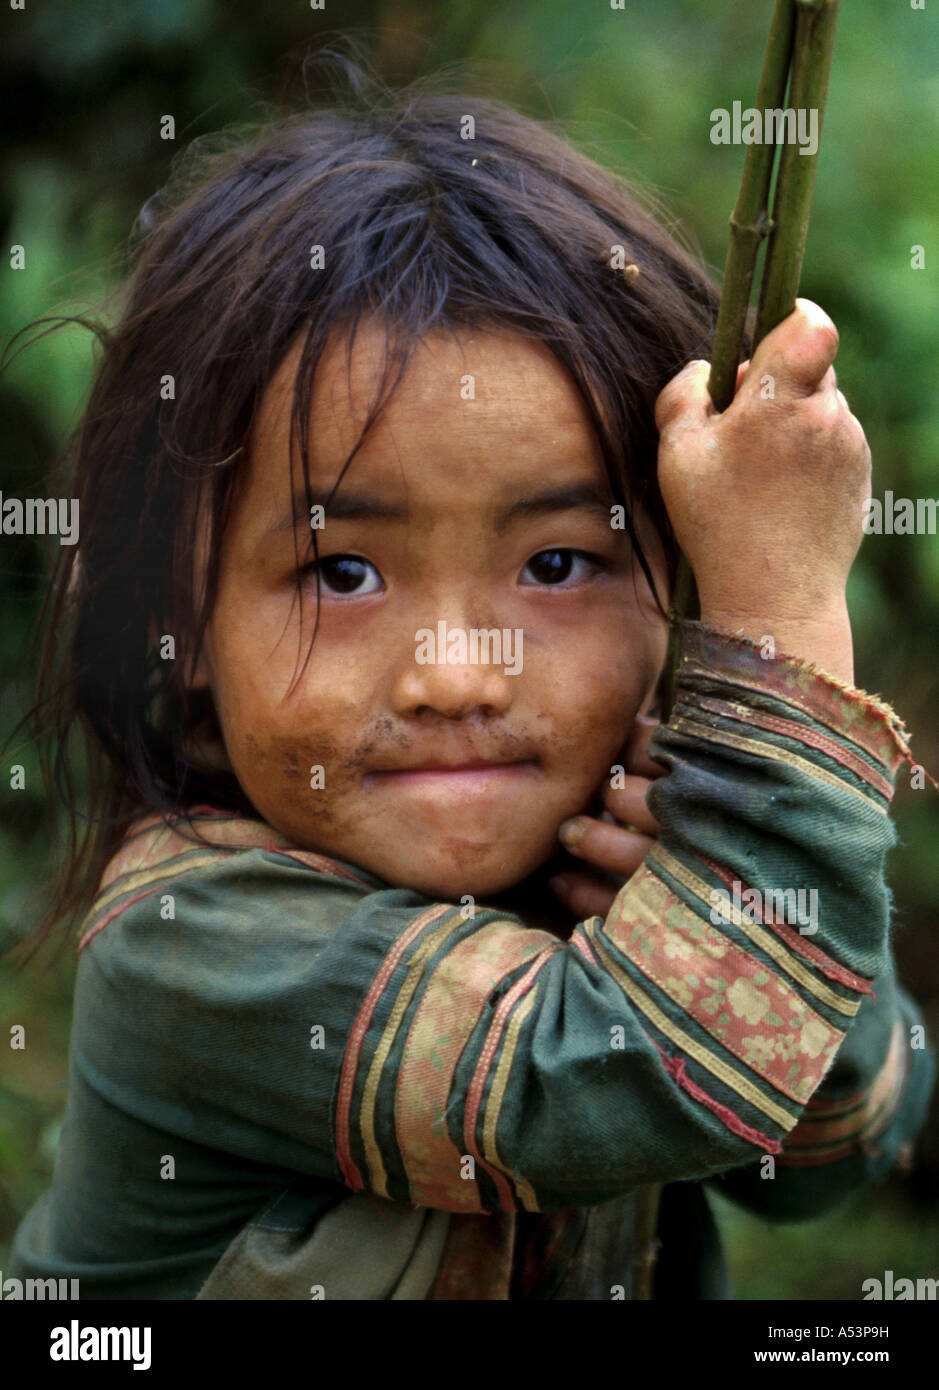 Painet ha1681 3381 children hmong girl child bo lung village lao cai vietnam country developing nation less economically Stock Photo